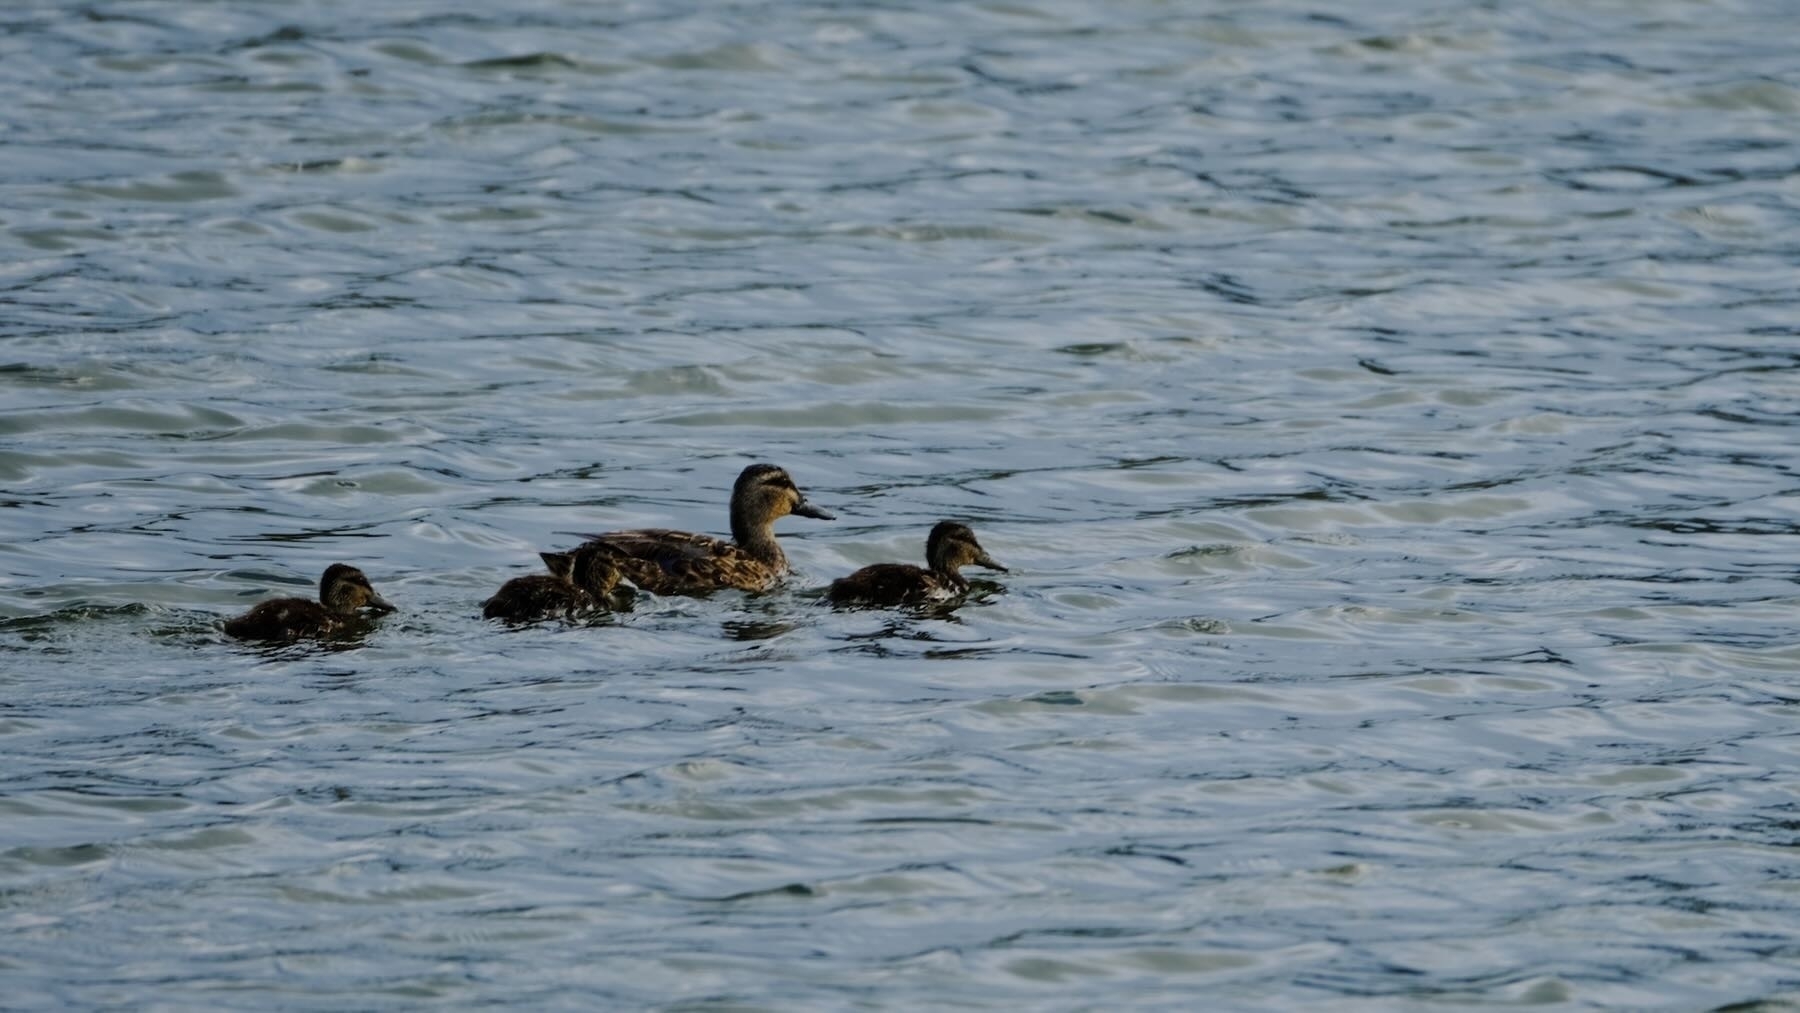 Adult bird with 3 chicks, swimming in the lake. 